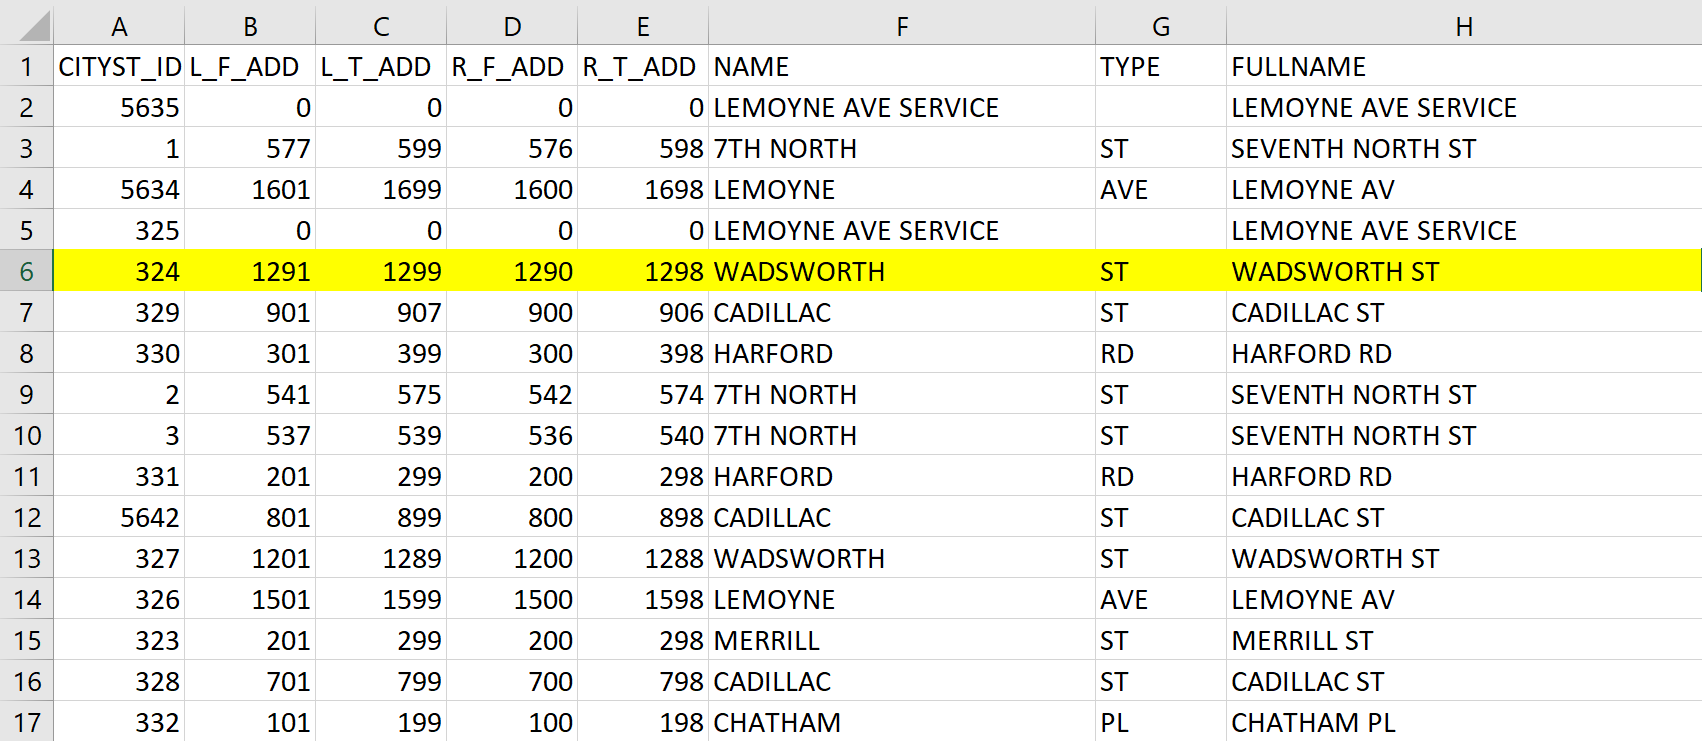 THE STREET ADDRESS FOR EACH CORNER IS CREATED BY THE COMBINATION OF L_F_ADD/R_F_ADD/L_T_ADD/R_T_ADD + NAME + TYPE COLUMNS IN THE KML FILE. FOR EXAMPLE L_F_ADD’S ADDRESS FOR THE CITYST_ID 324 IS 1291 WADSWORH ST.